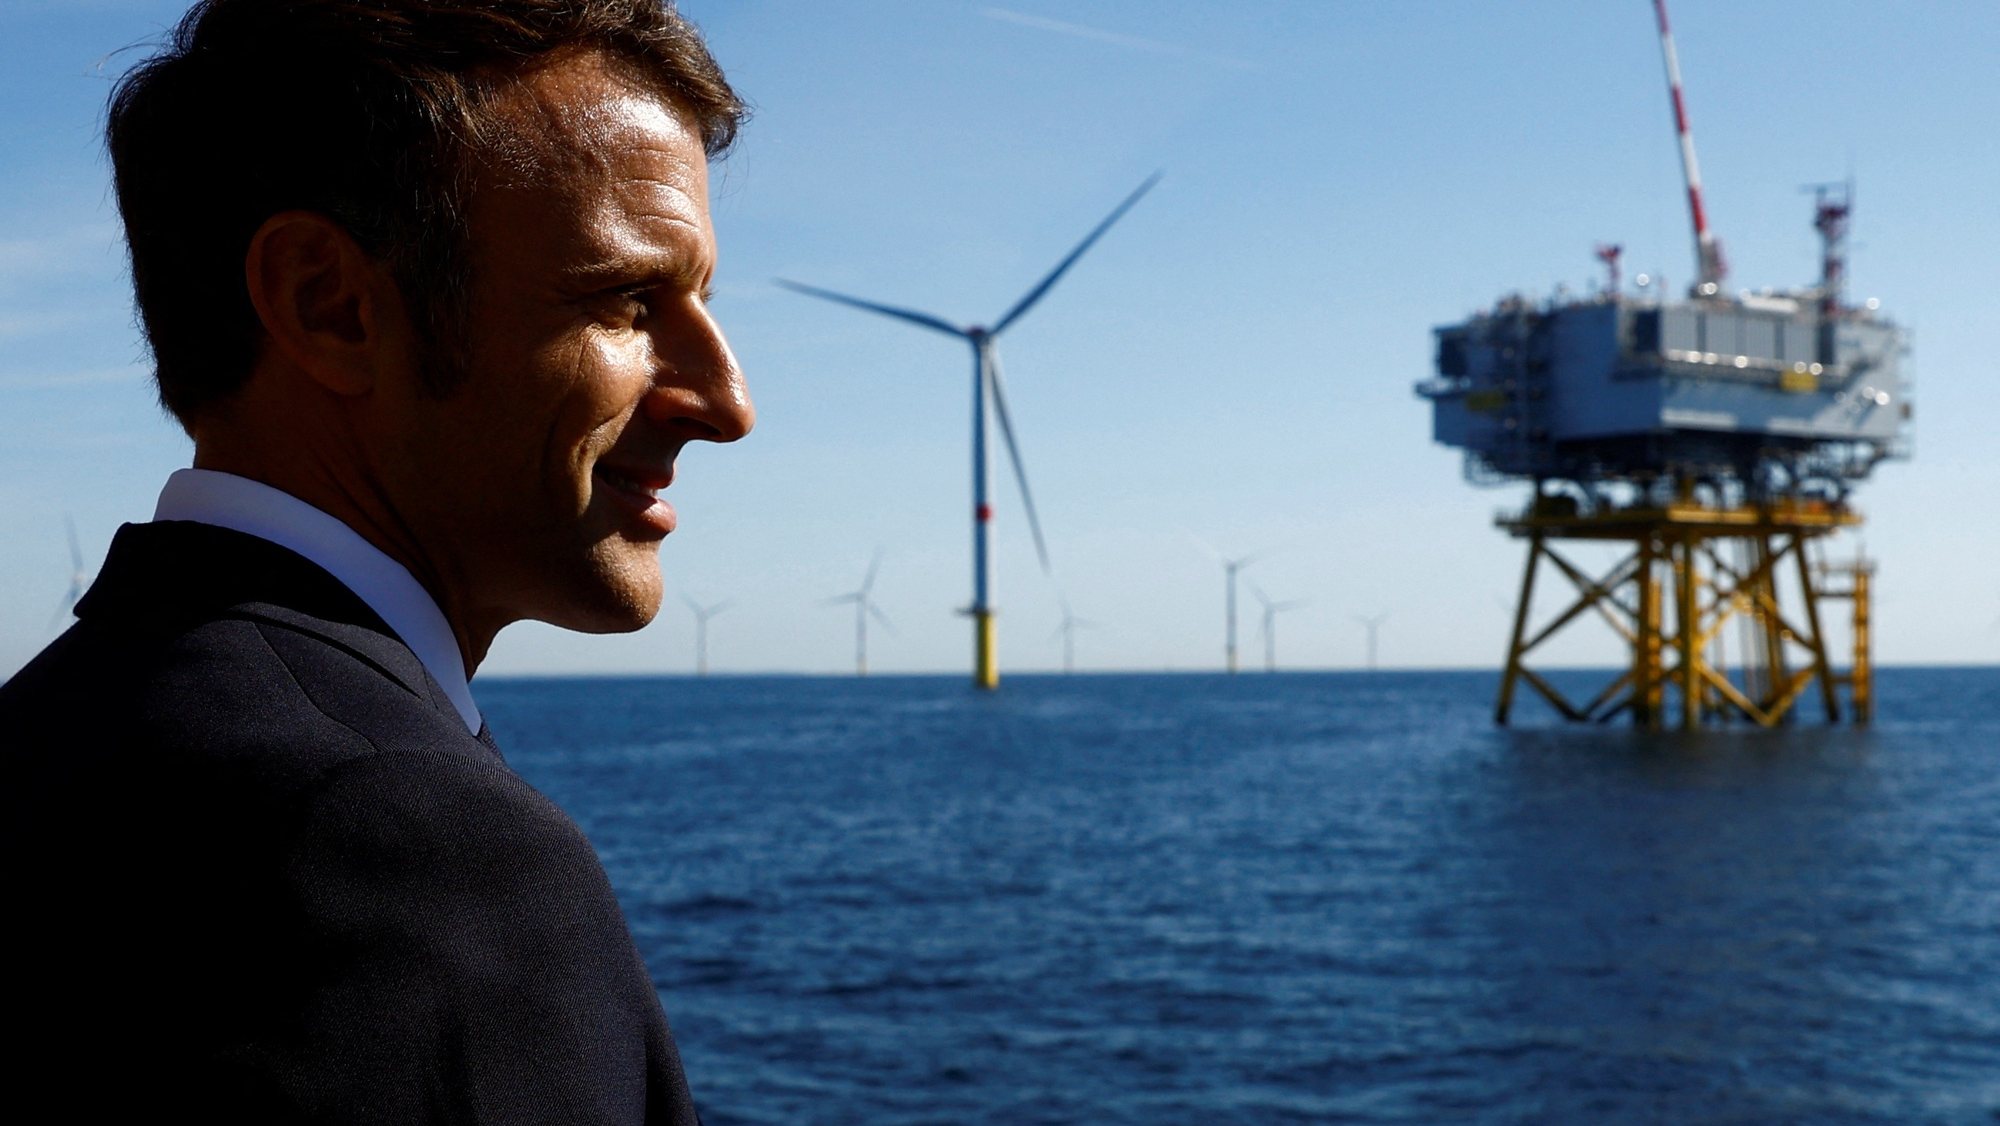 epa10198774 French President Emmanuel Macron talks with workers (not pictured) on board a boat during a visit at the Saint-Nazaire offshore wind farm, off the coast of the Guerande peninsula in western France, 22 September 2022.  EPA/STEPHANE MAHE / POOL  MAXPPP OUT